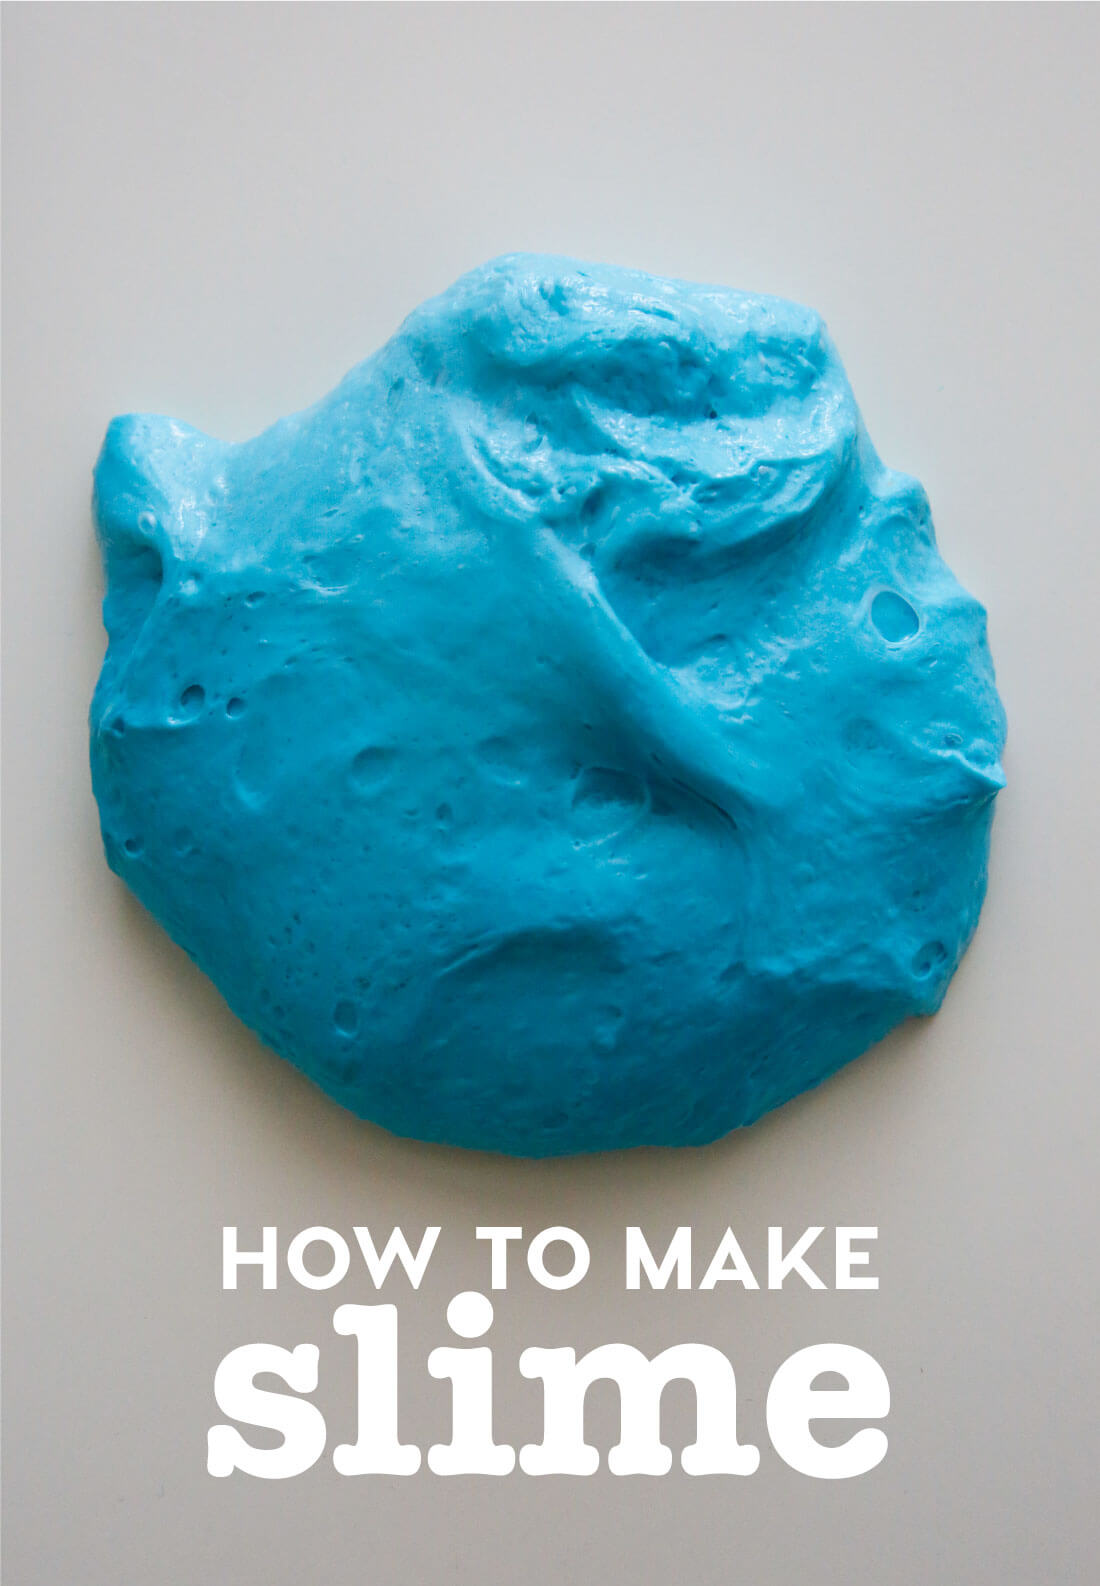 How to make fluffy slime - a fluffy slime recipe to try out for a fun kids activity! from www.thirtyhandmadedays.com